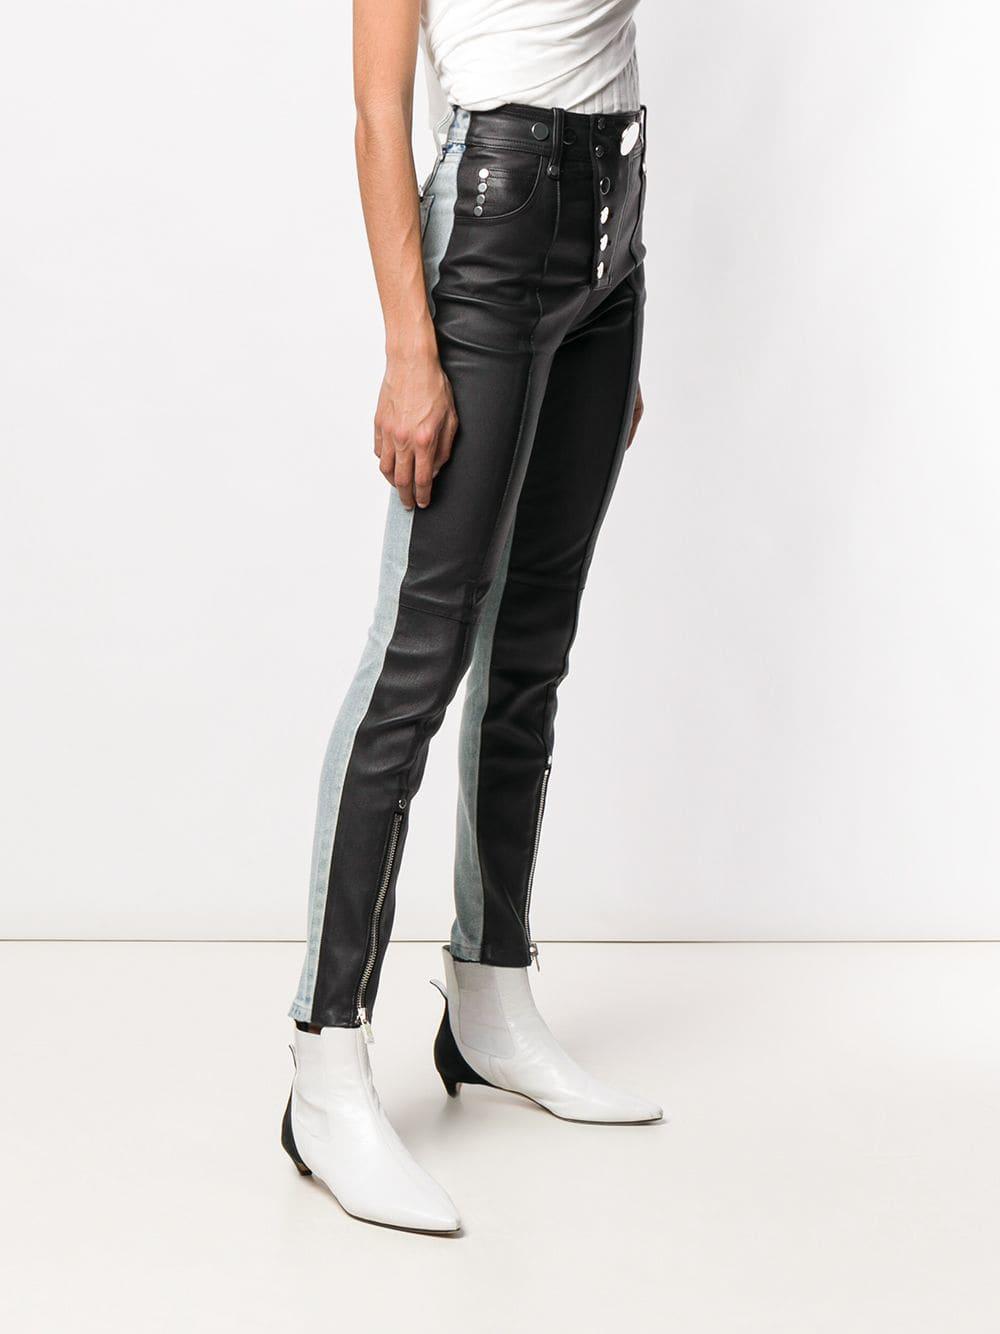 How To Style Leather Pants for Work, Play or Party — The Wardrobe Consultant